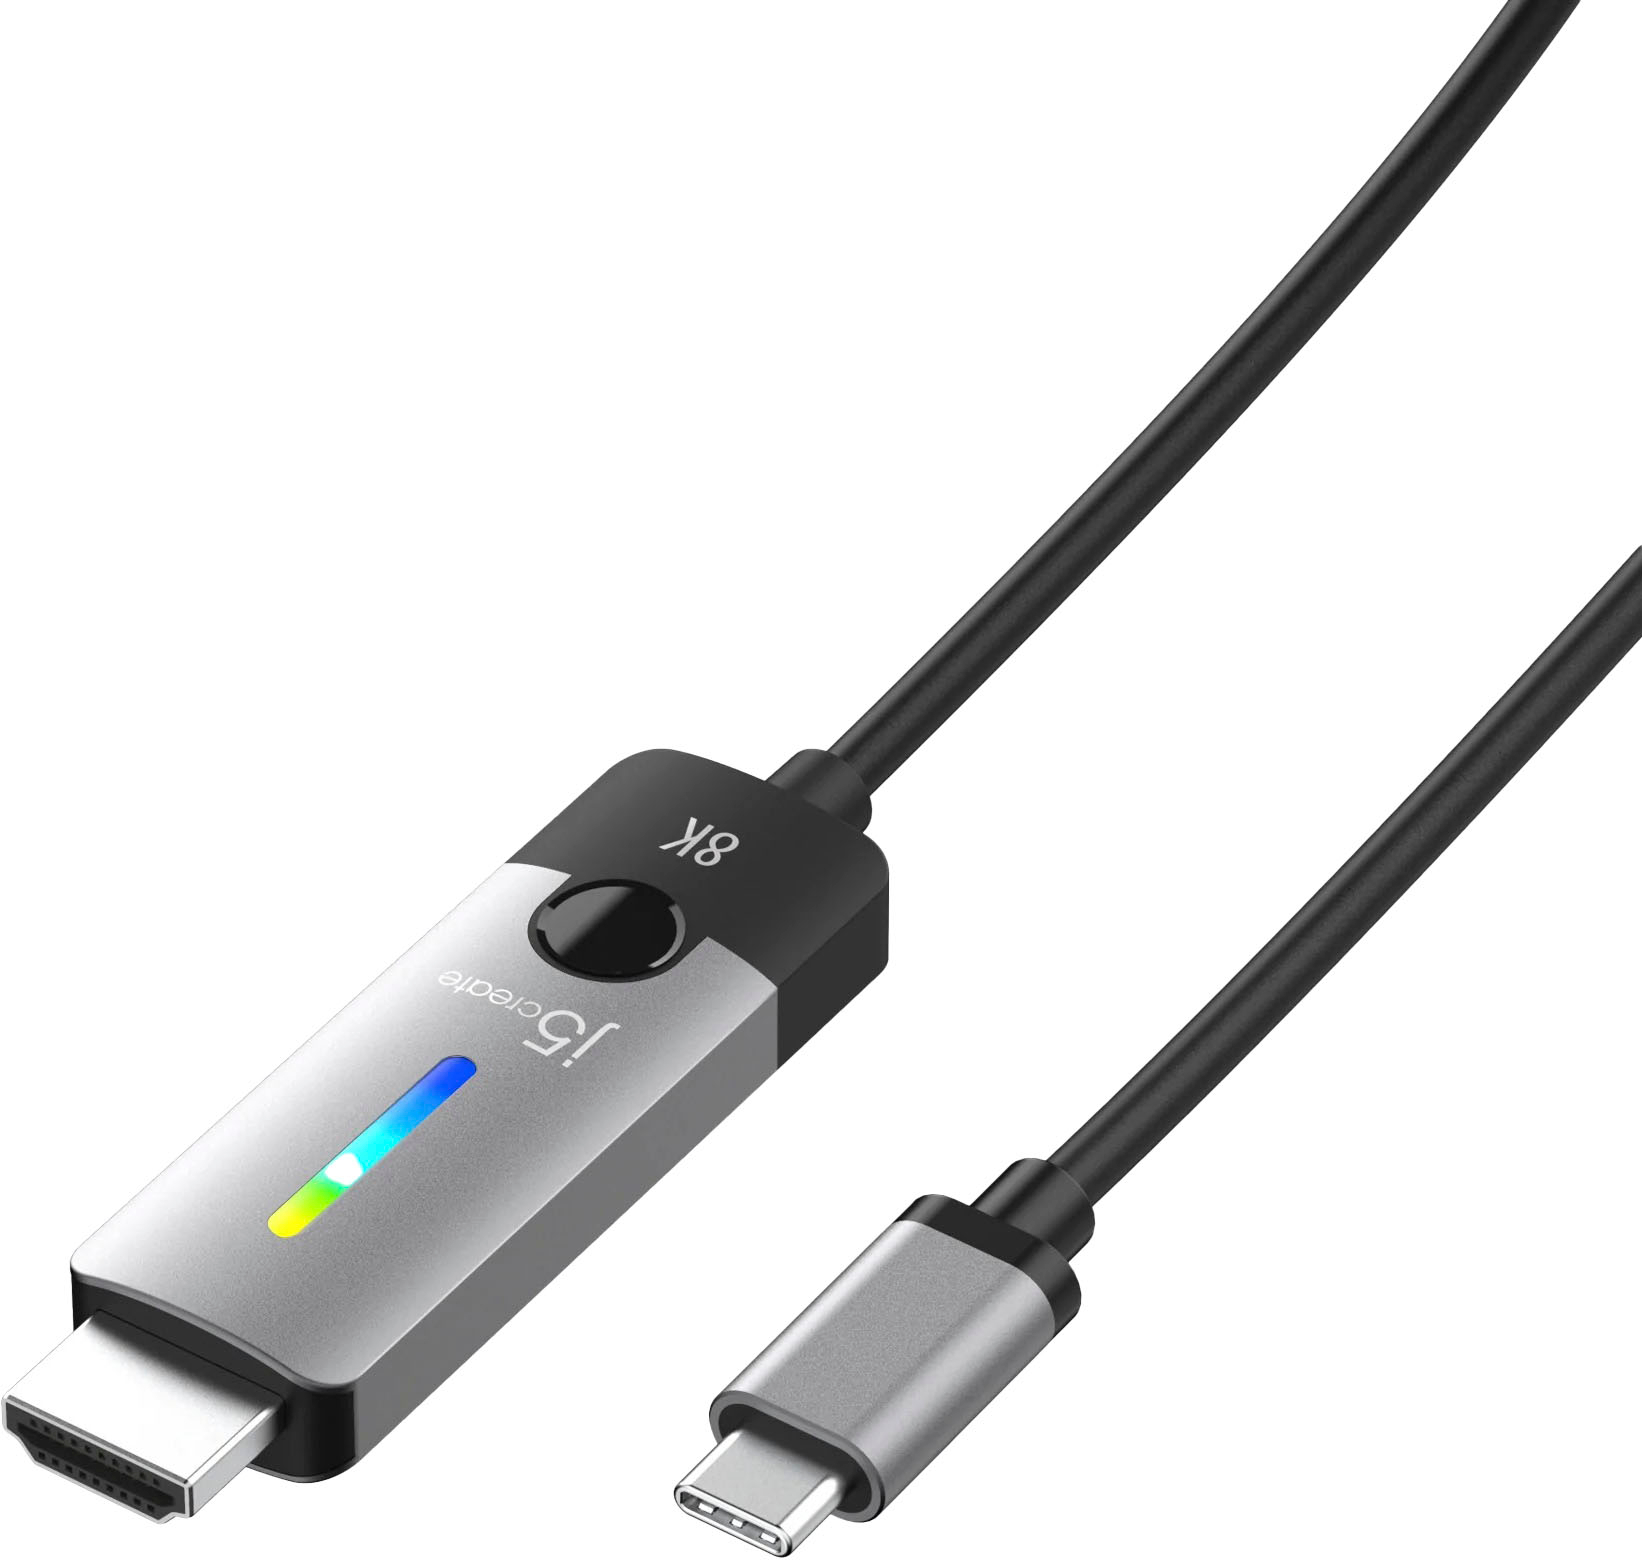 Adaptateur USB Type-C vers HDMI Support 4k / USB 3.0 / Type-C